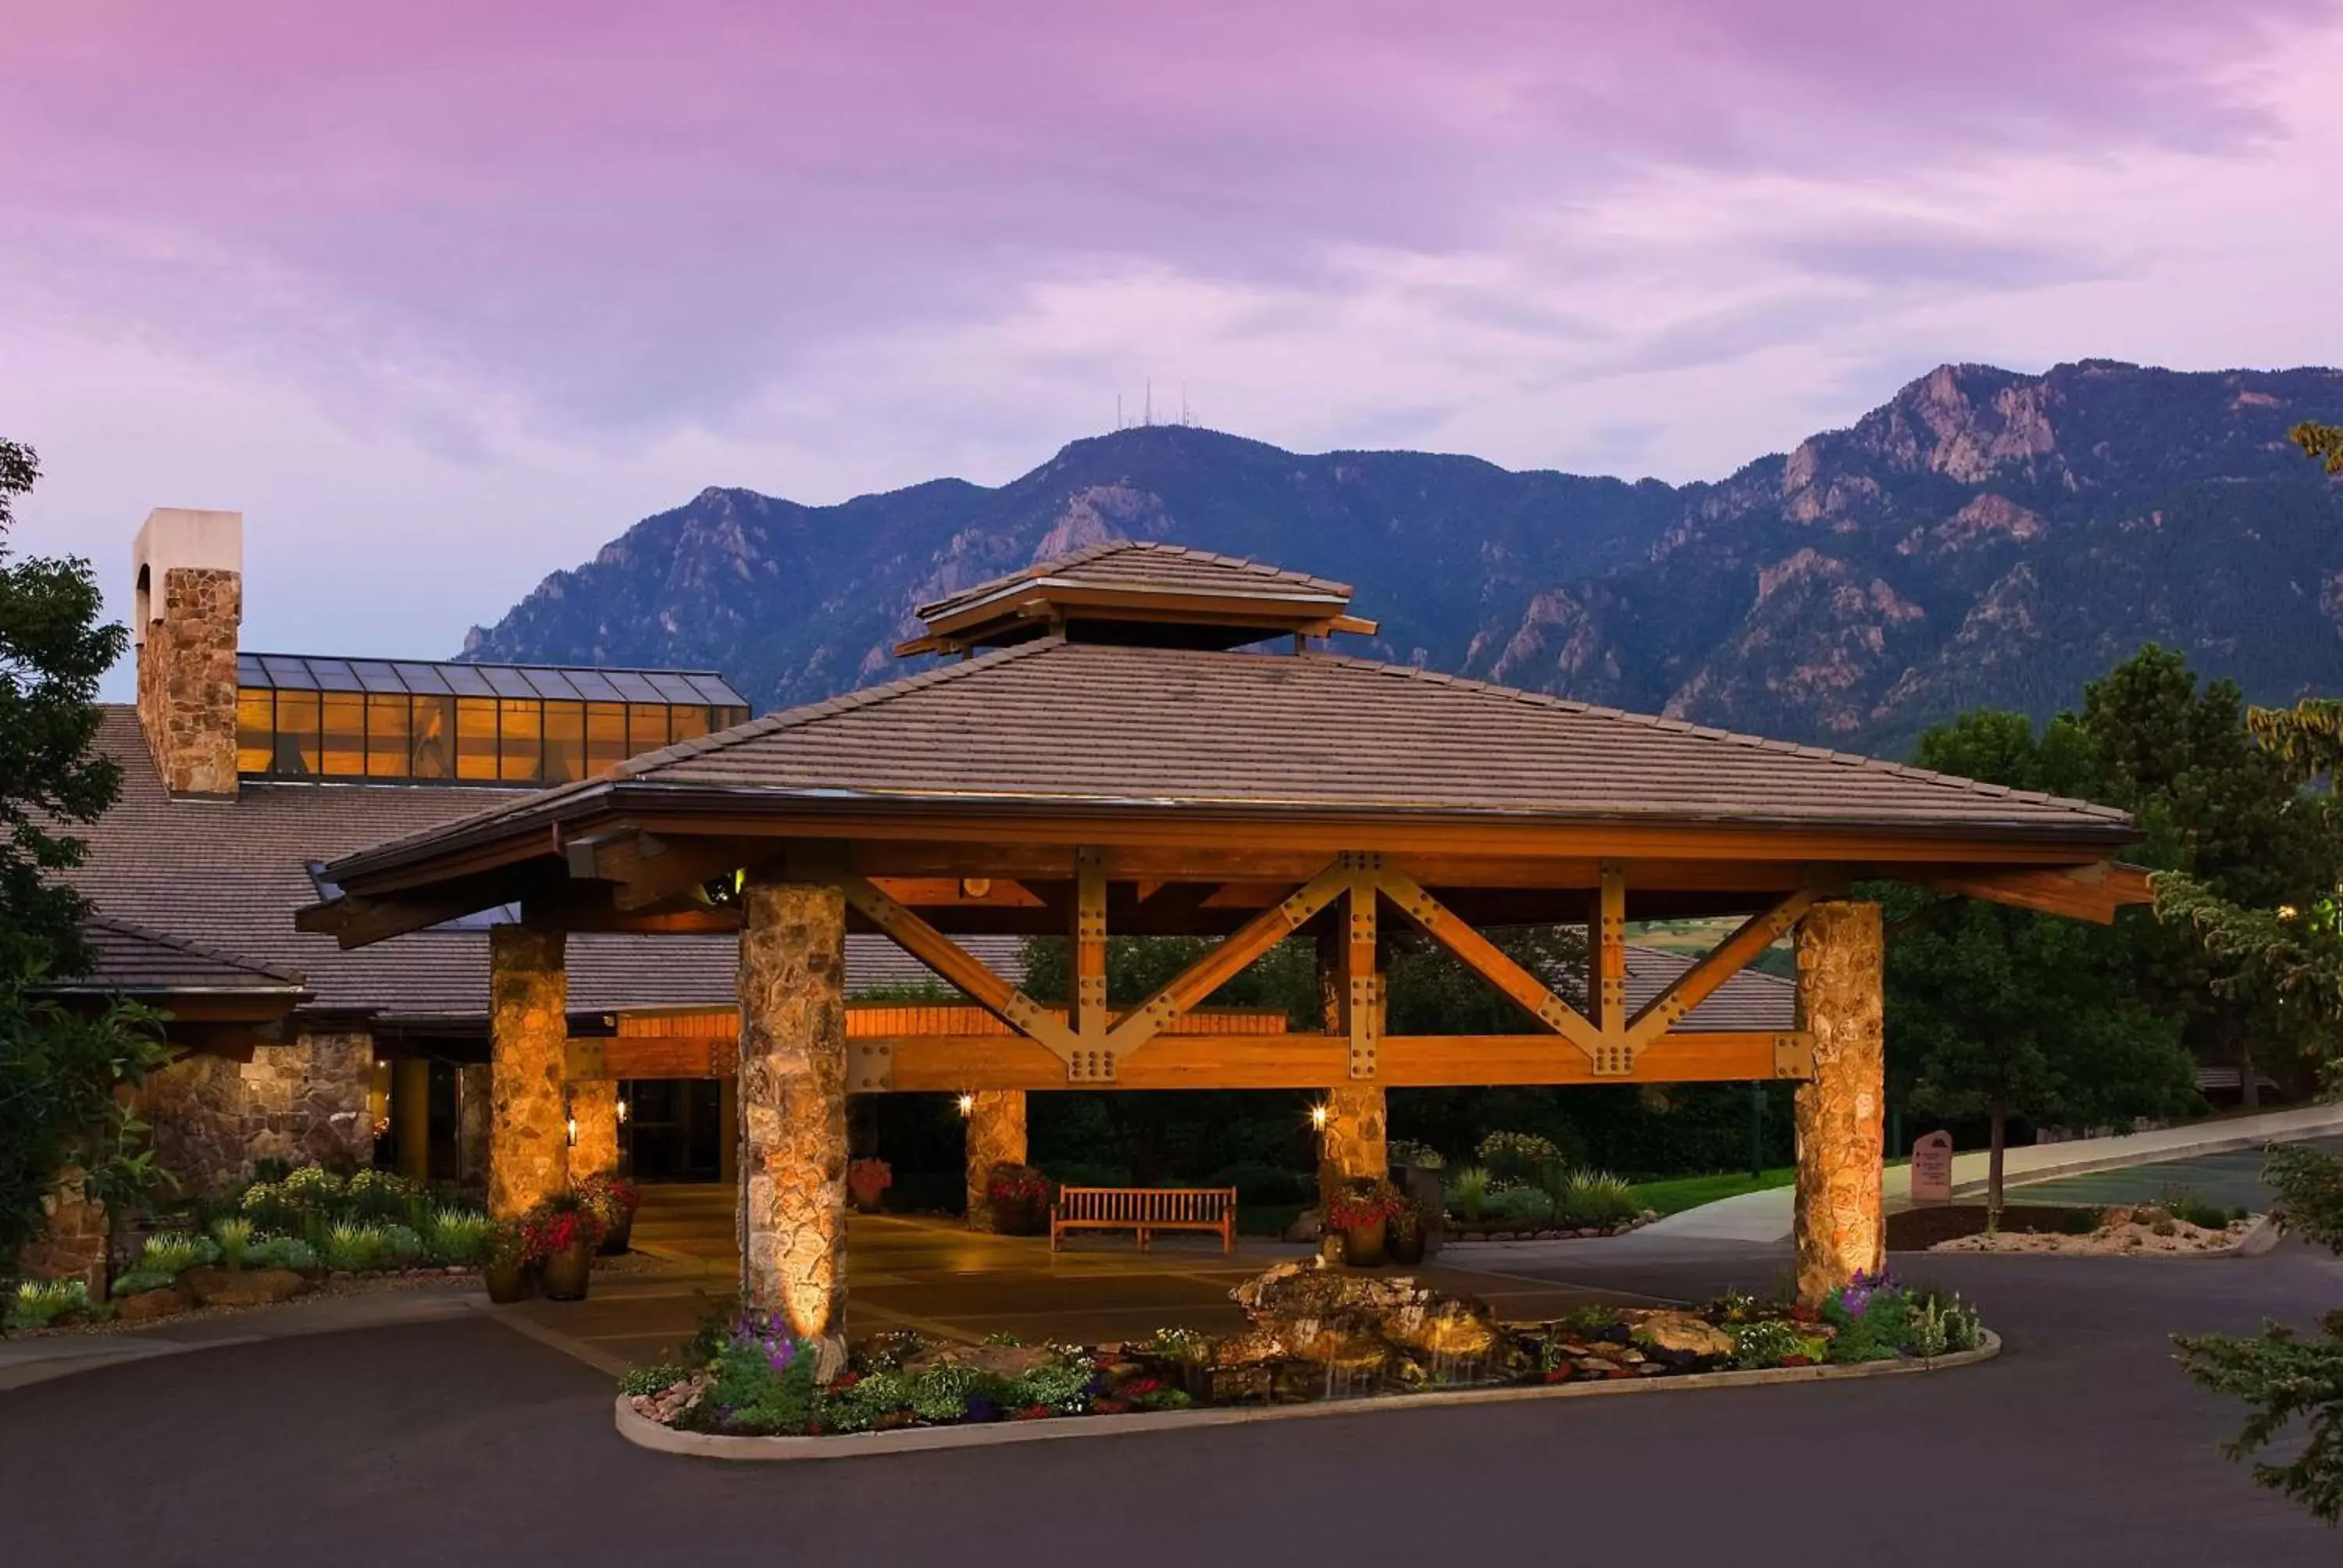 Property building in Cheyenne Mountain Resort, a Dolce by Wyndham